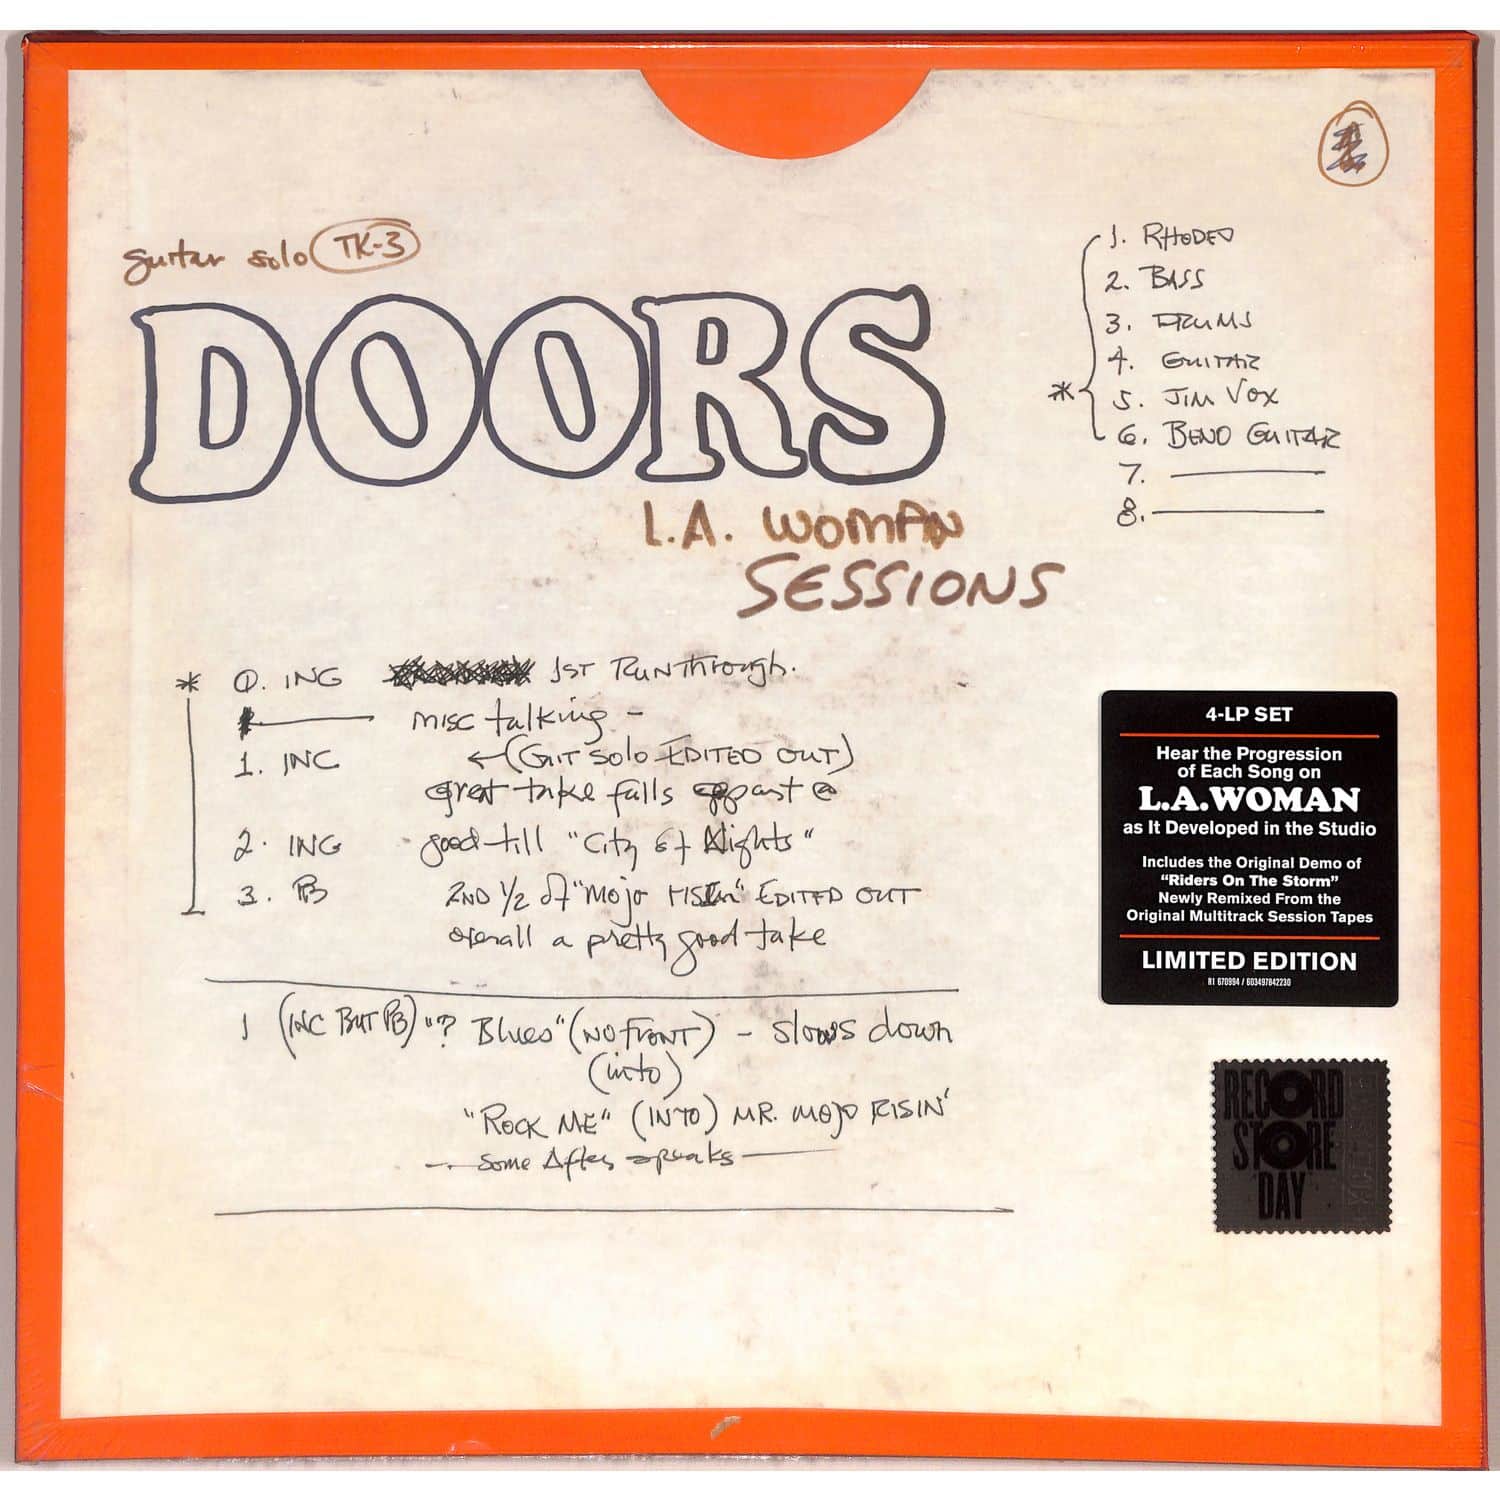 The Doors - L.A.WOMAN SESSIONS 